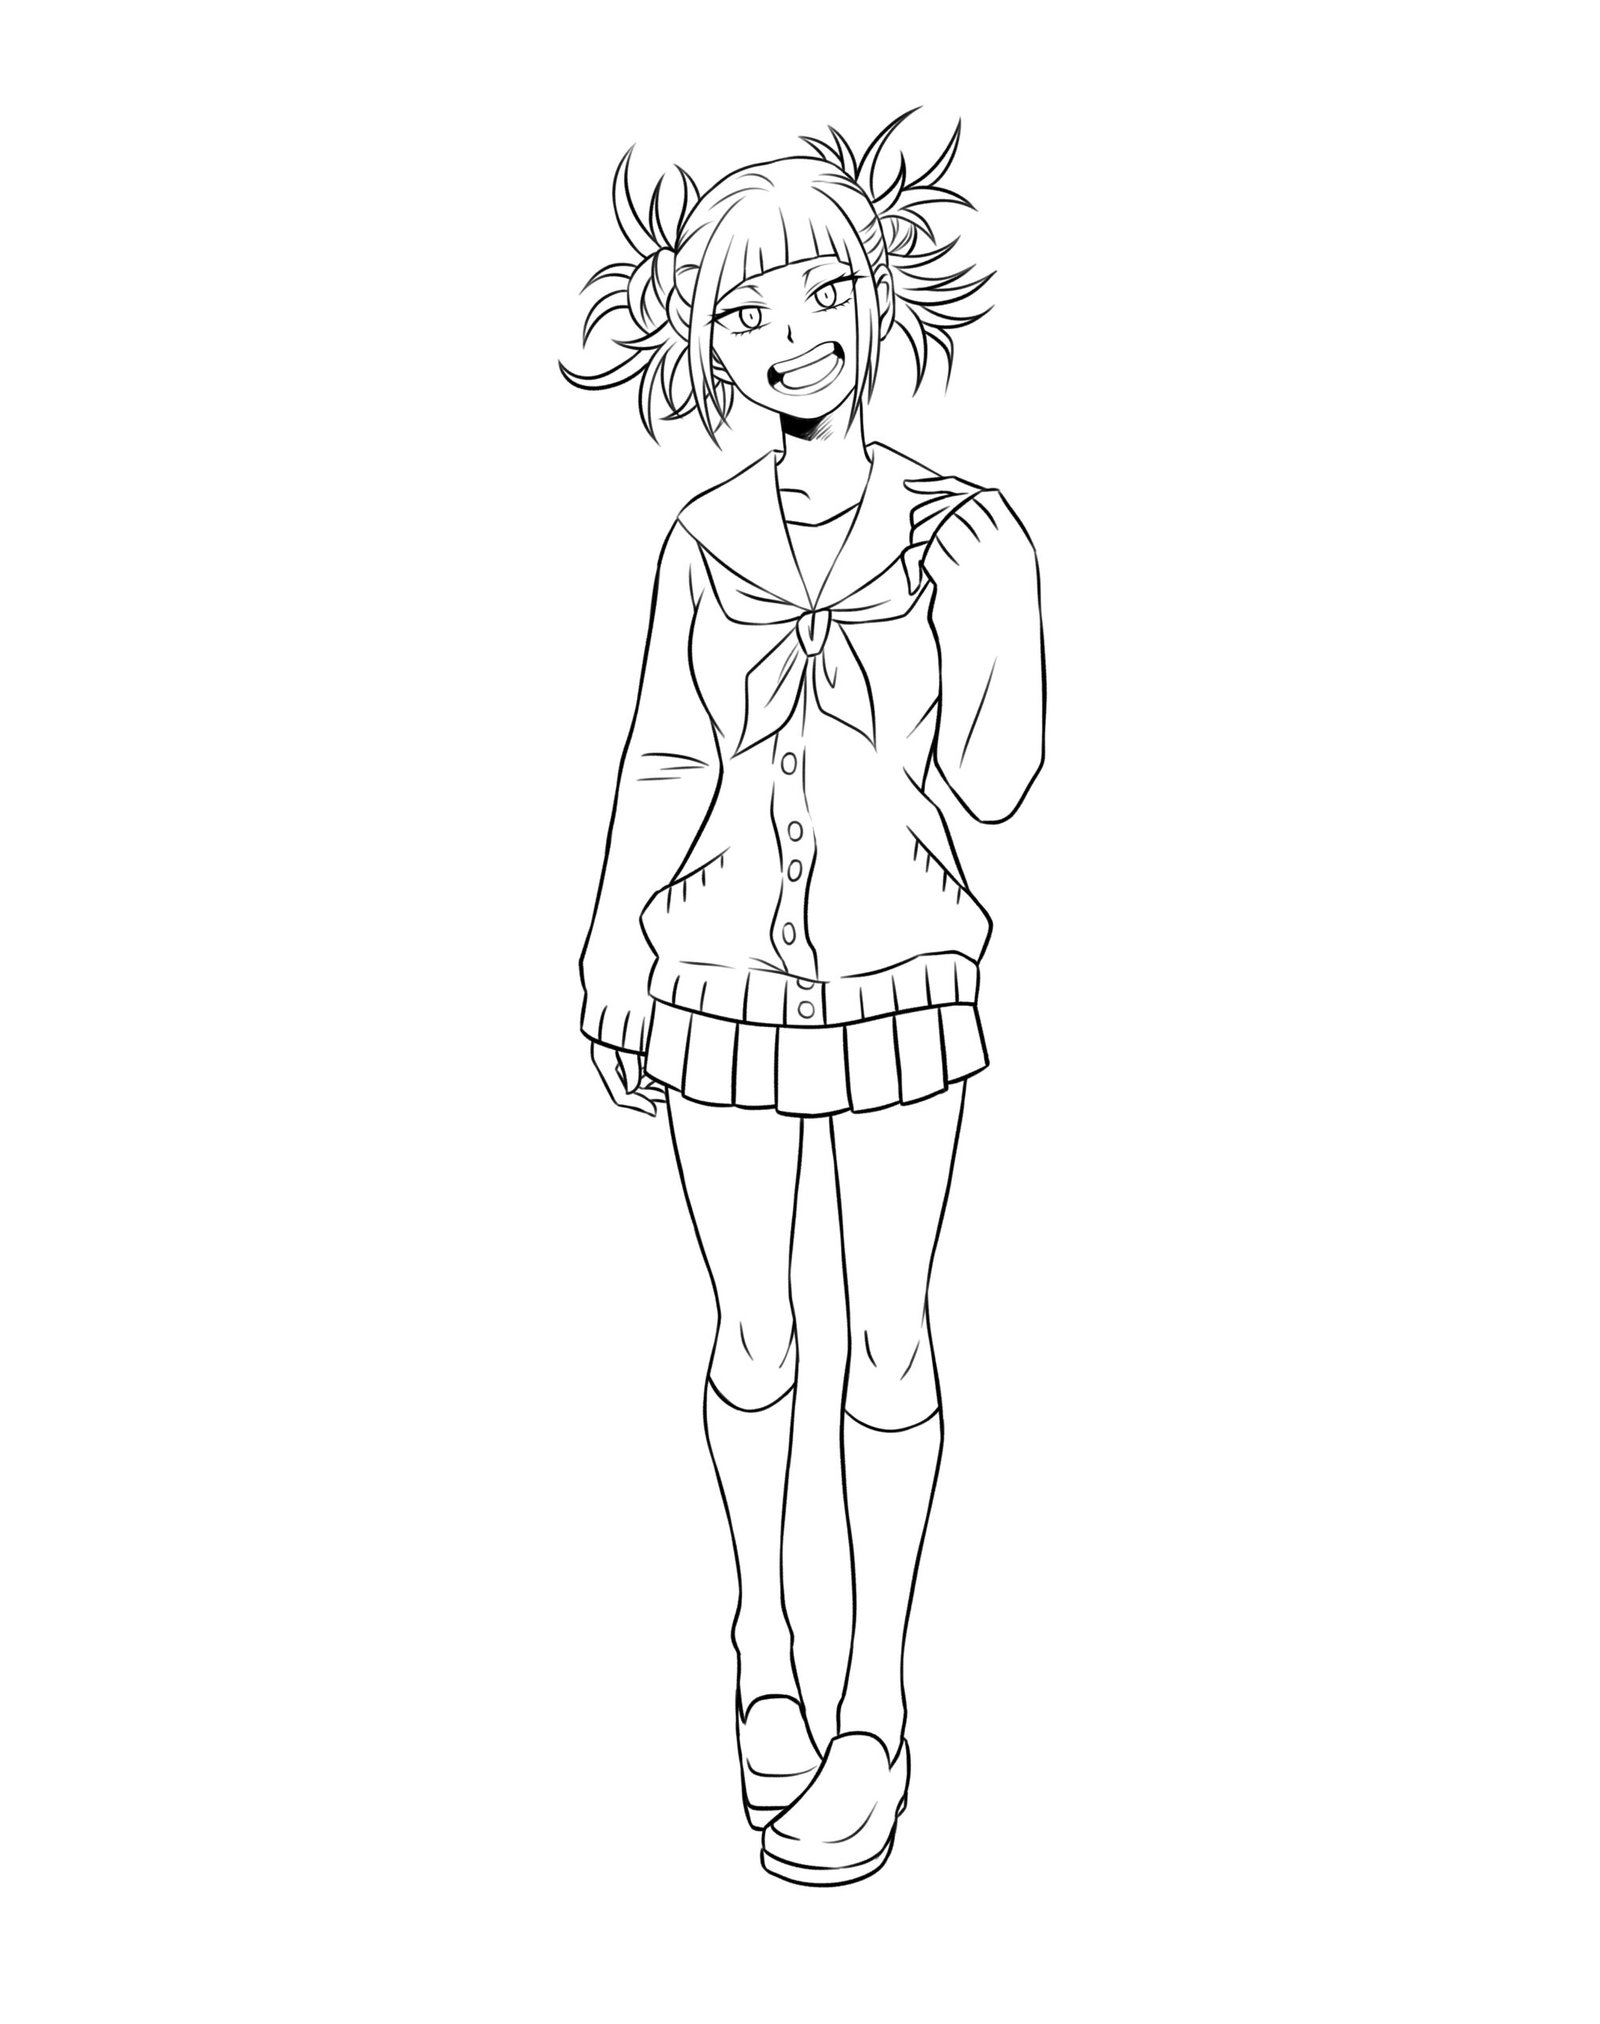 4) Enhancement in Himiko Toga's Drawing